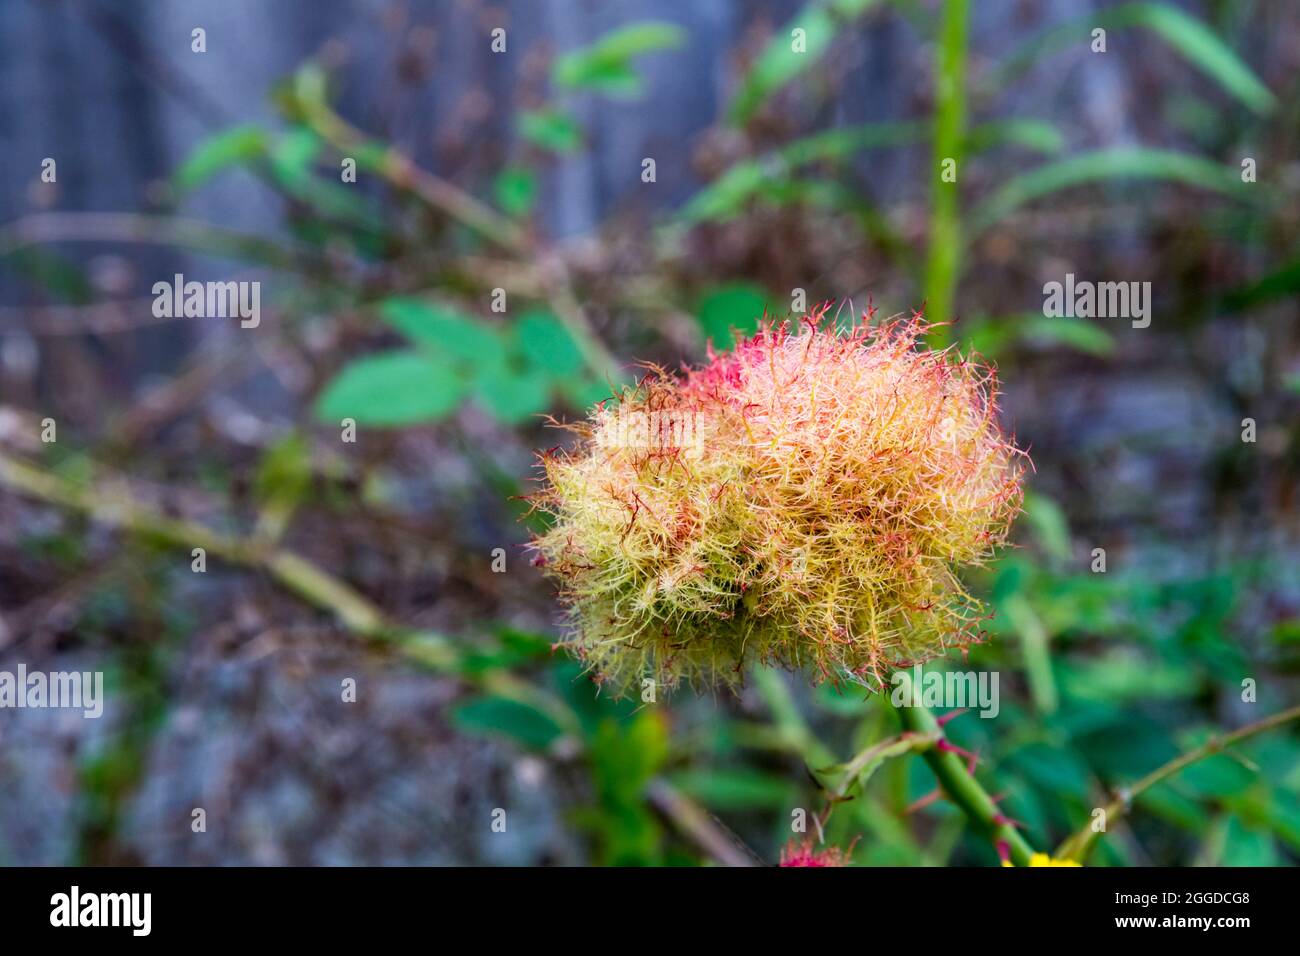 Moss gall on dog rose, Rosa canina, caused by the gall wasp Diplolepis rosae. Stock Photo